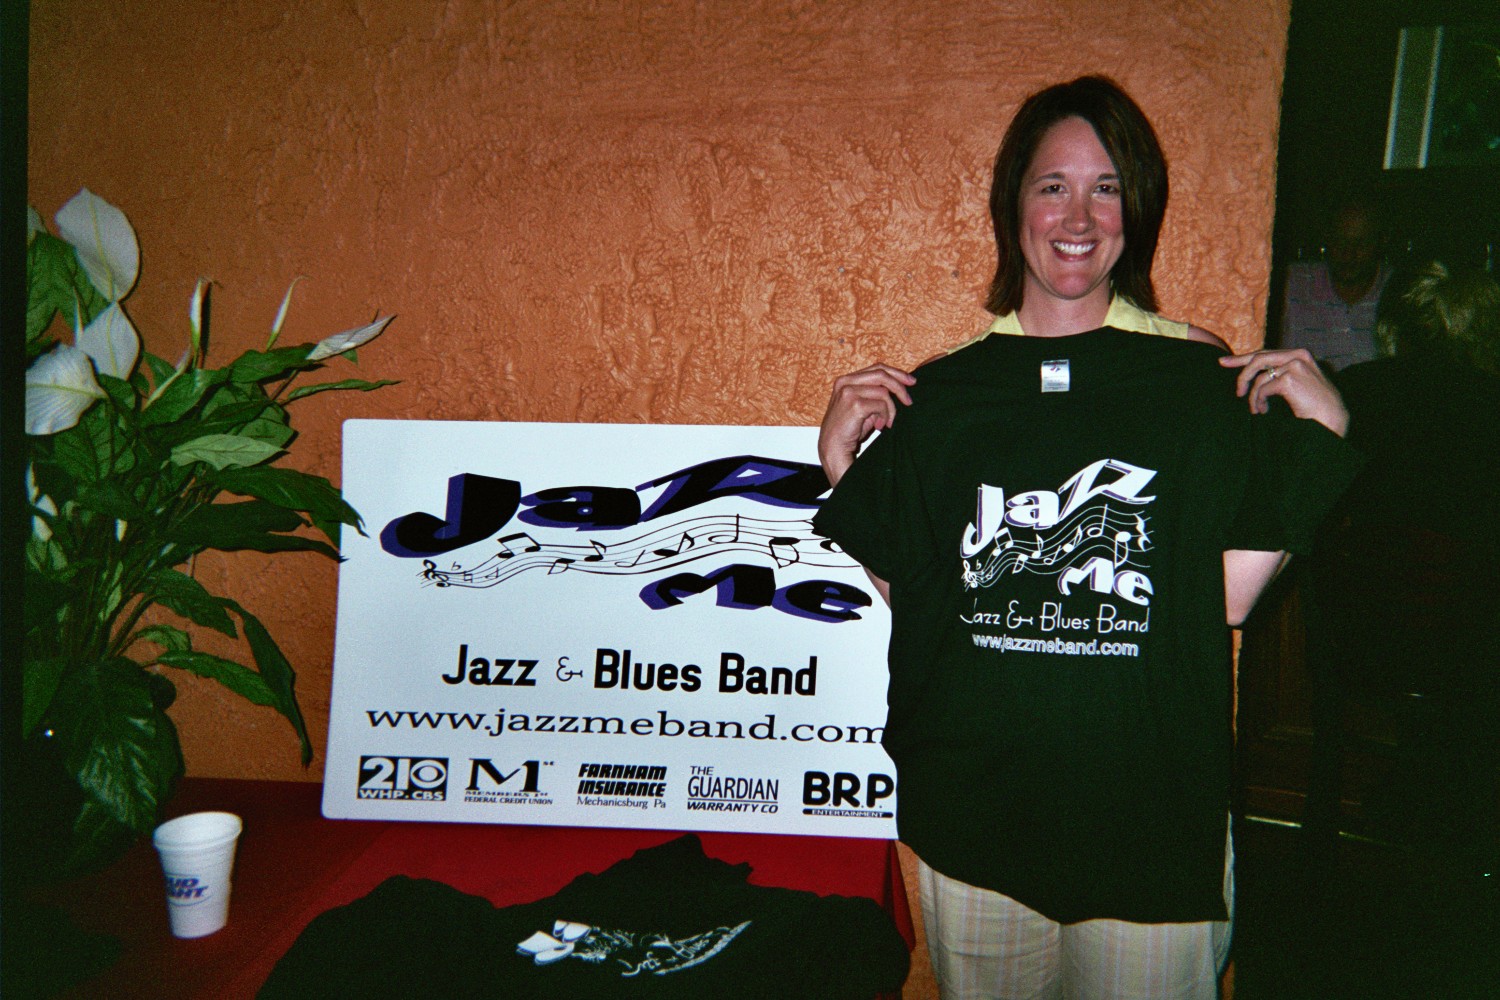 Shannon with her new Jazz Me t-shirt
